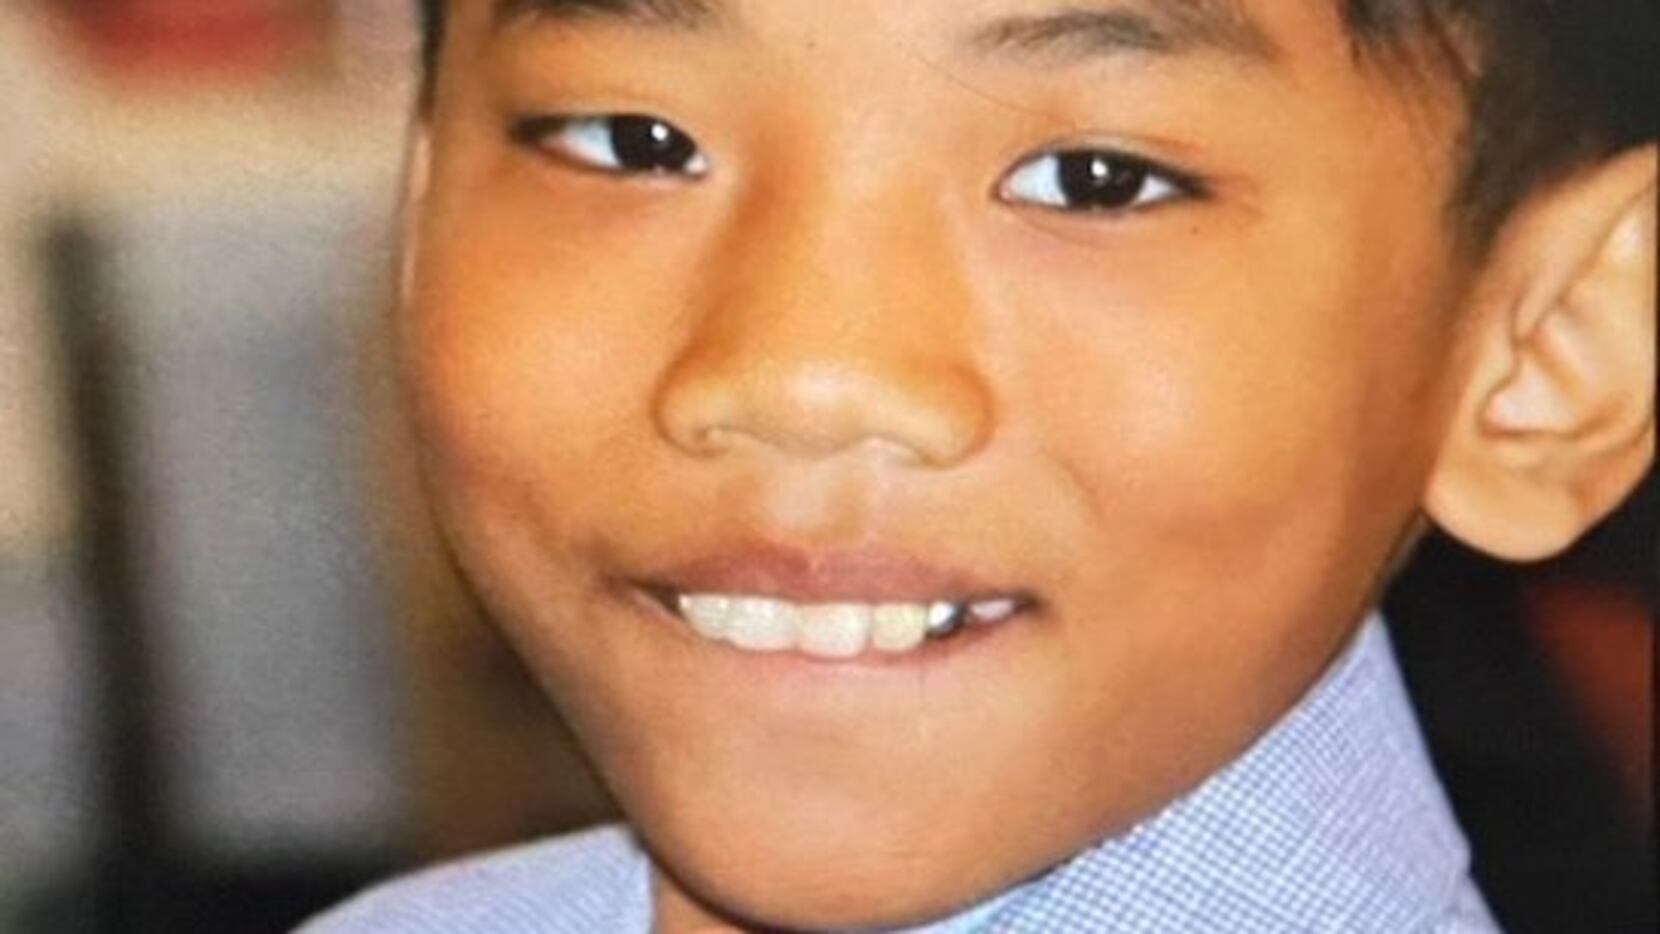 Lewisville police are asking for the public's help finding 10-year-old Simon Lian, who went...